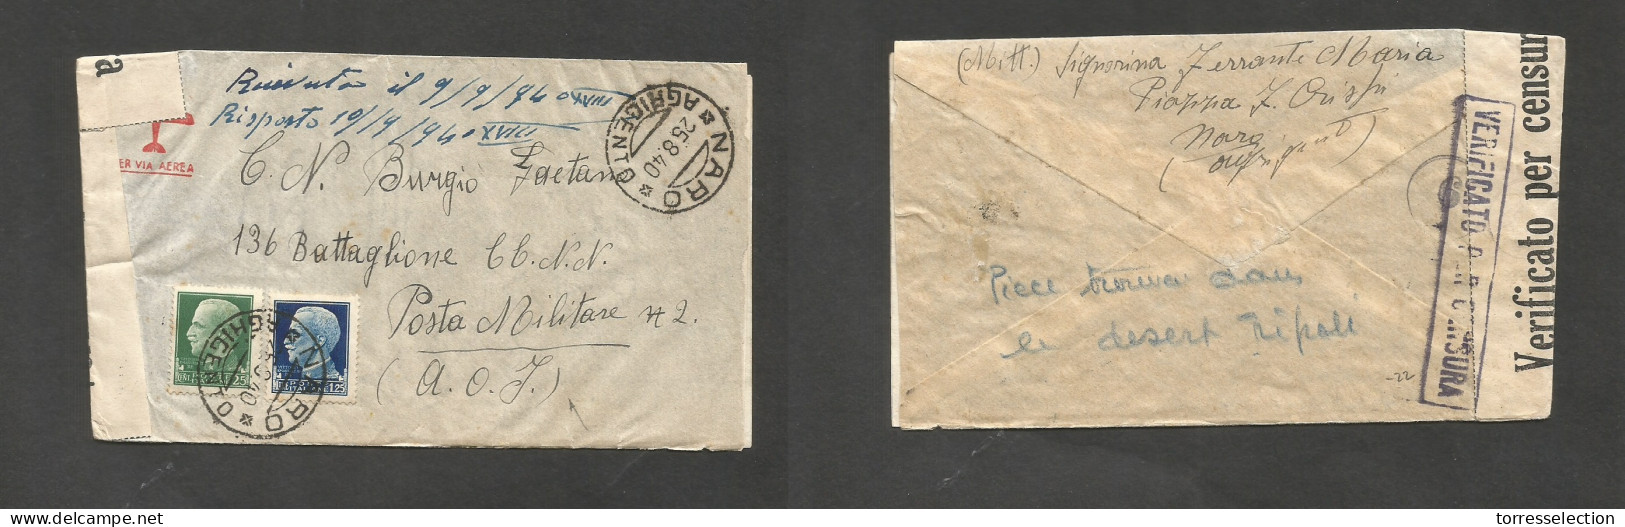 Italy - XX. 1940 (25 Aug) Naro - Africa Oriental Italiana. Air Multifkd Censored Envelope, Censored With Contains. SALE. - Non Classés